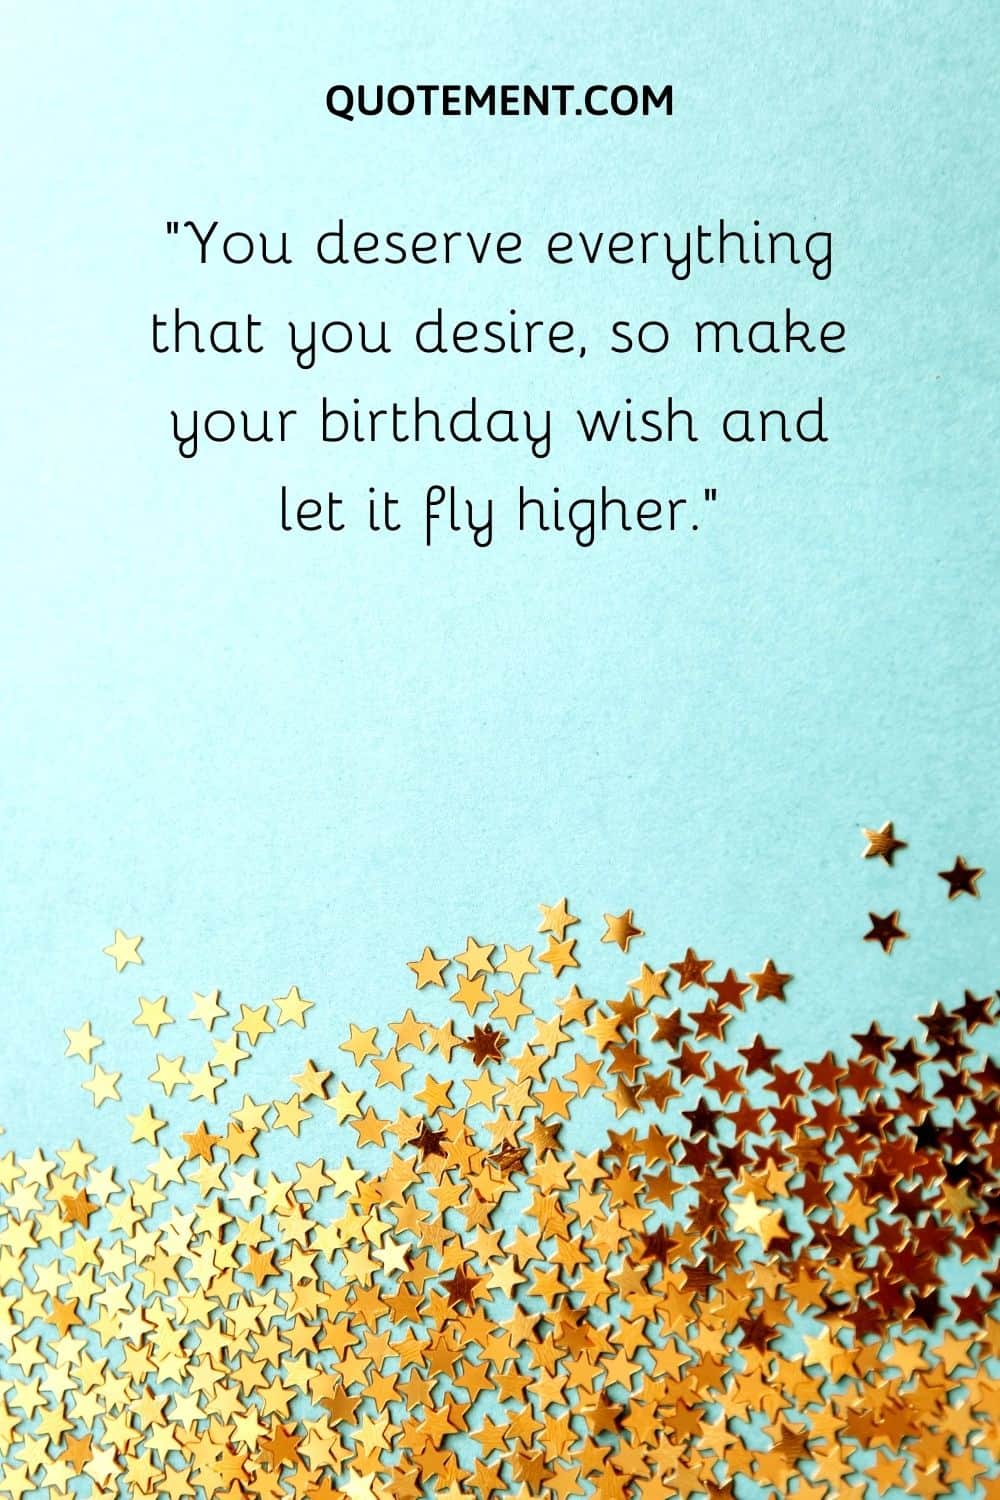 You deserve everything that you desire, so make your birthday wish and let it fly higher.